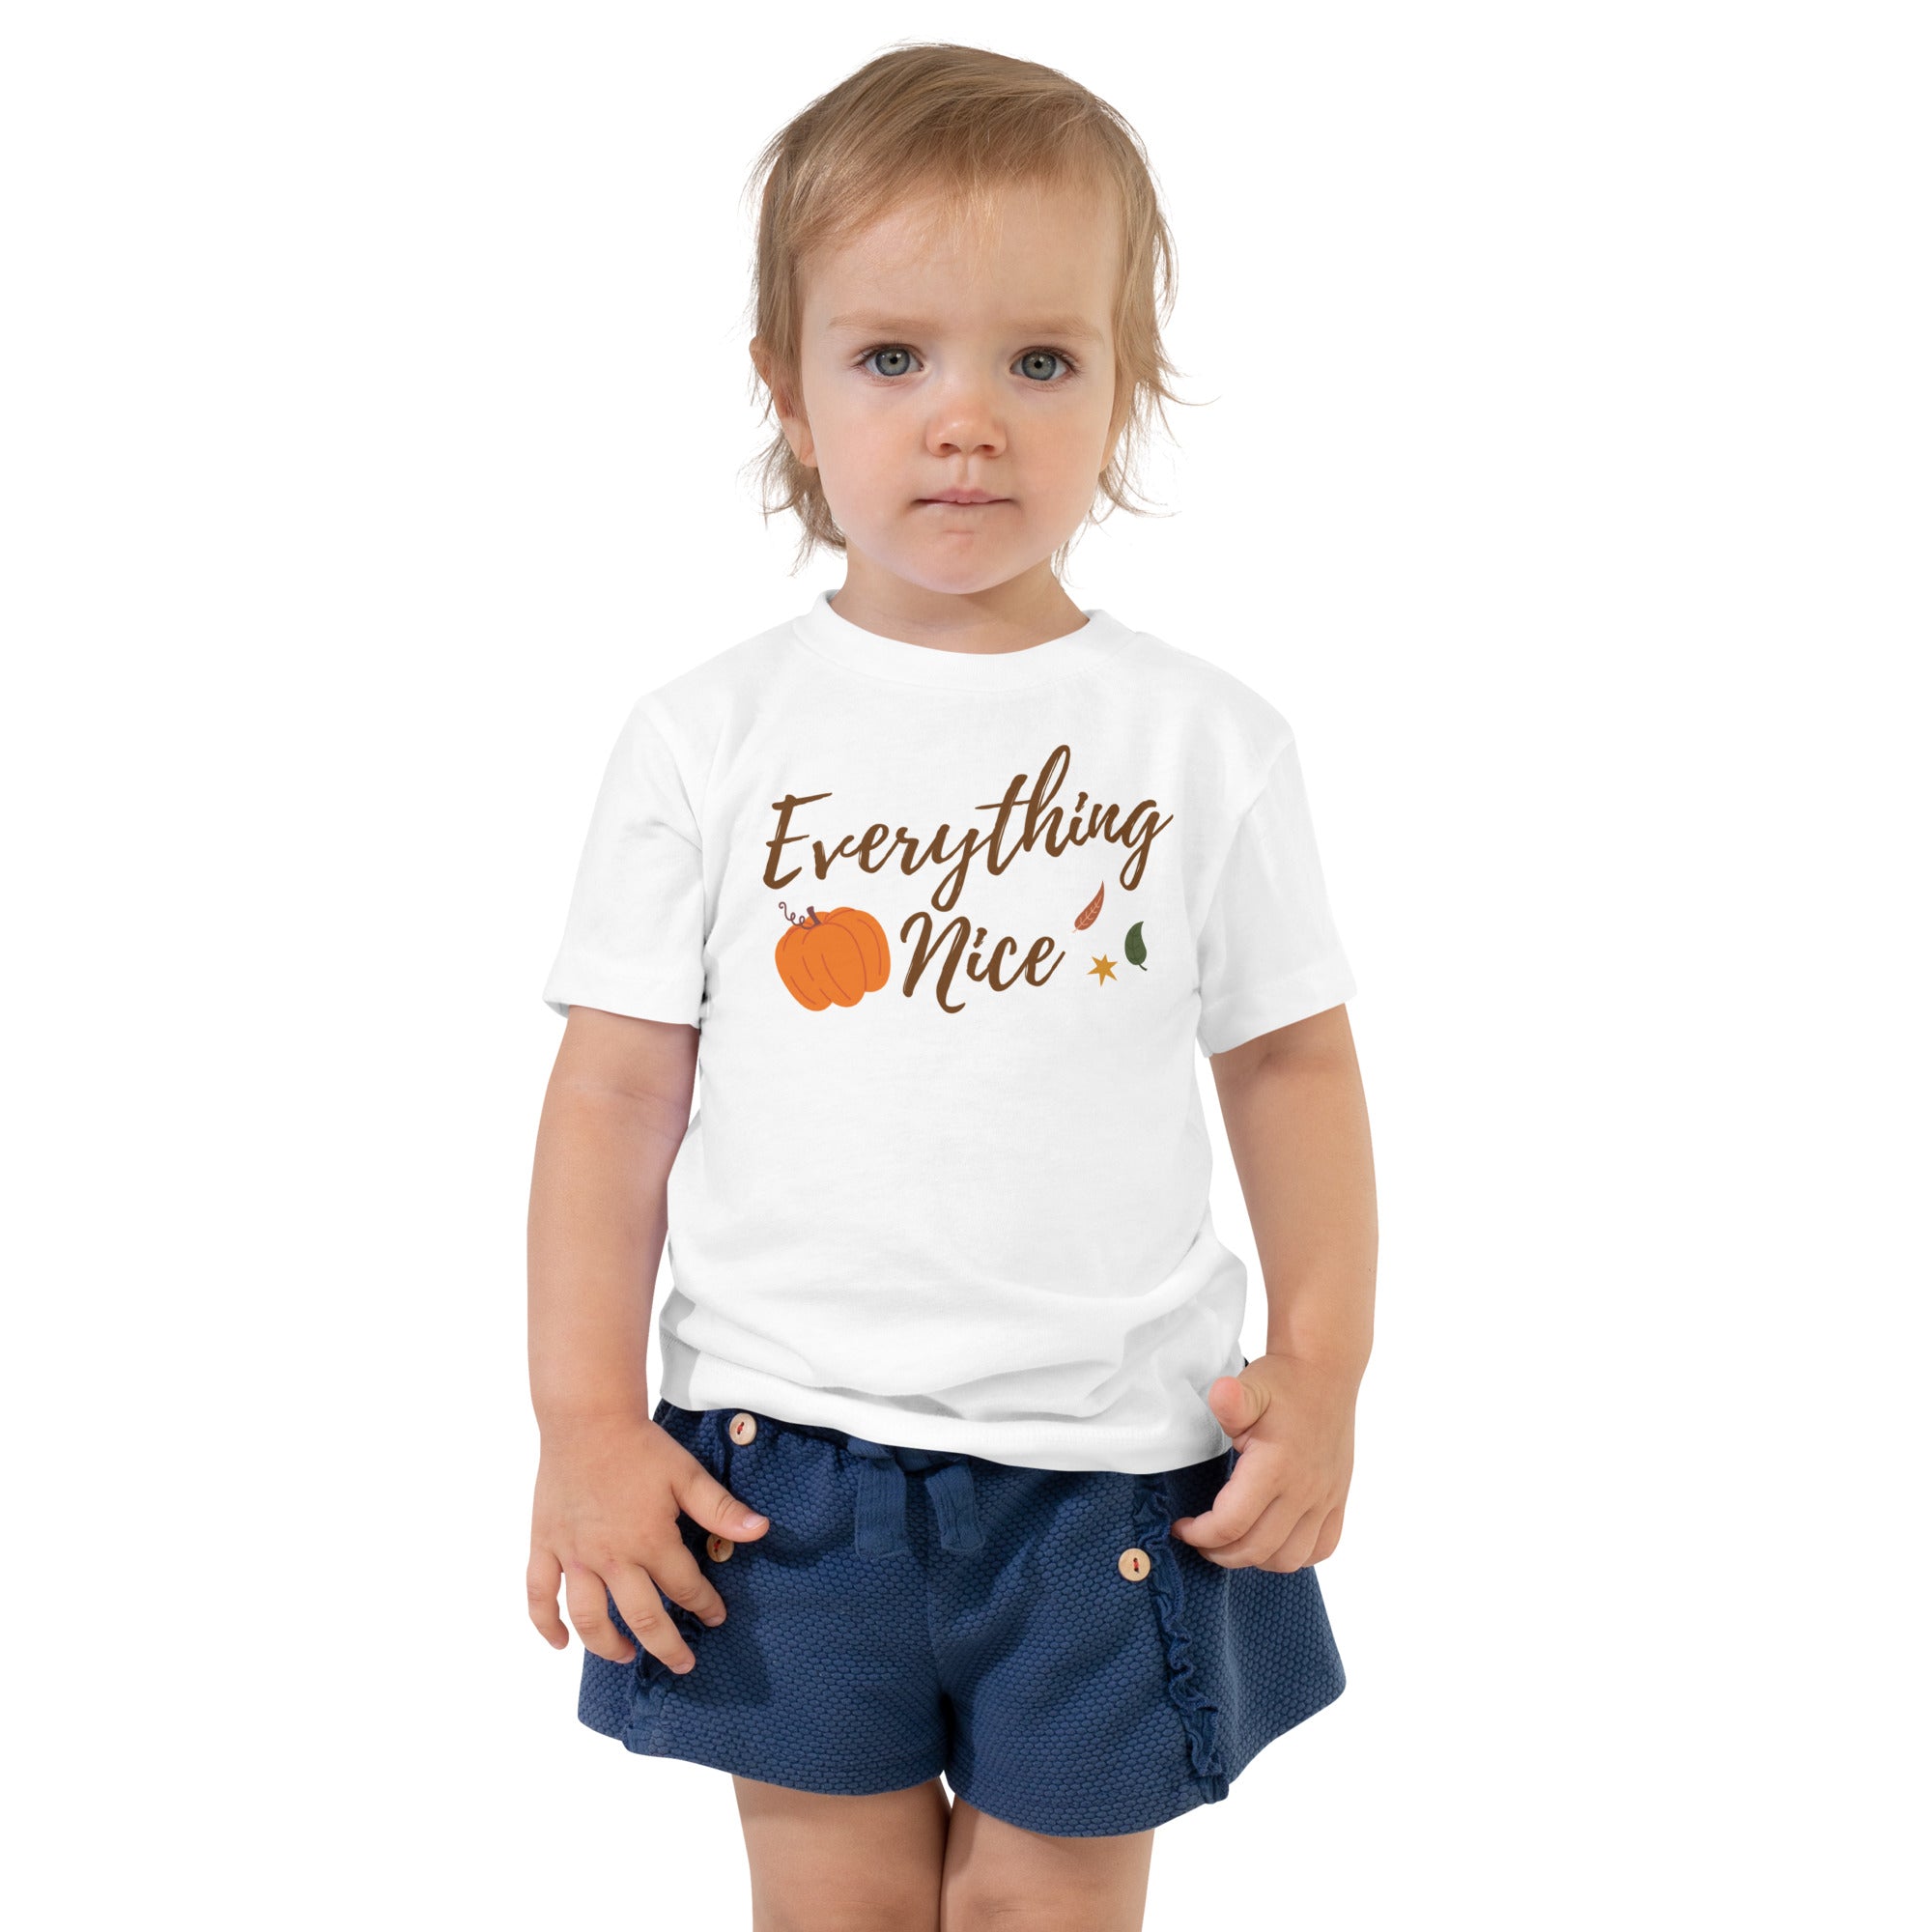 Pumpkin Spice and Everything Nice -T-shirt Set (Toddler)